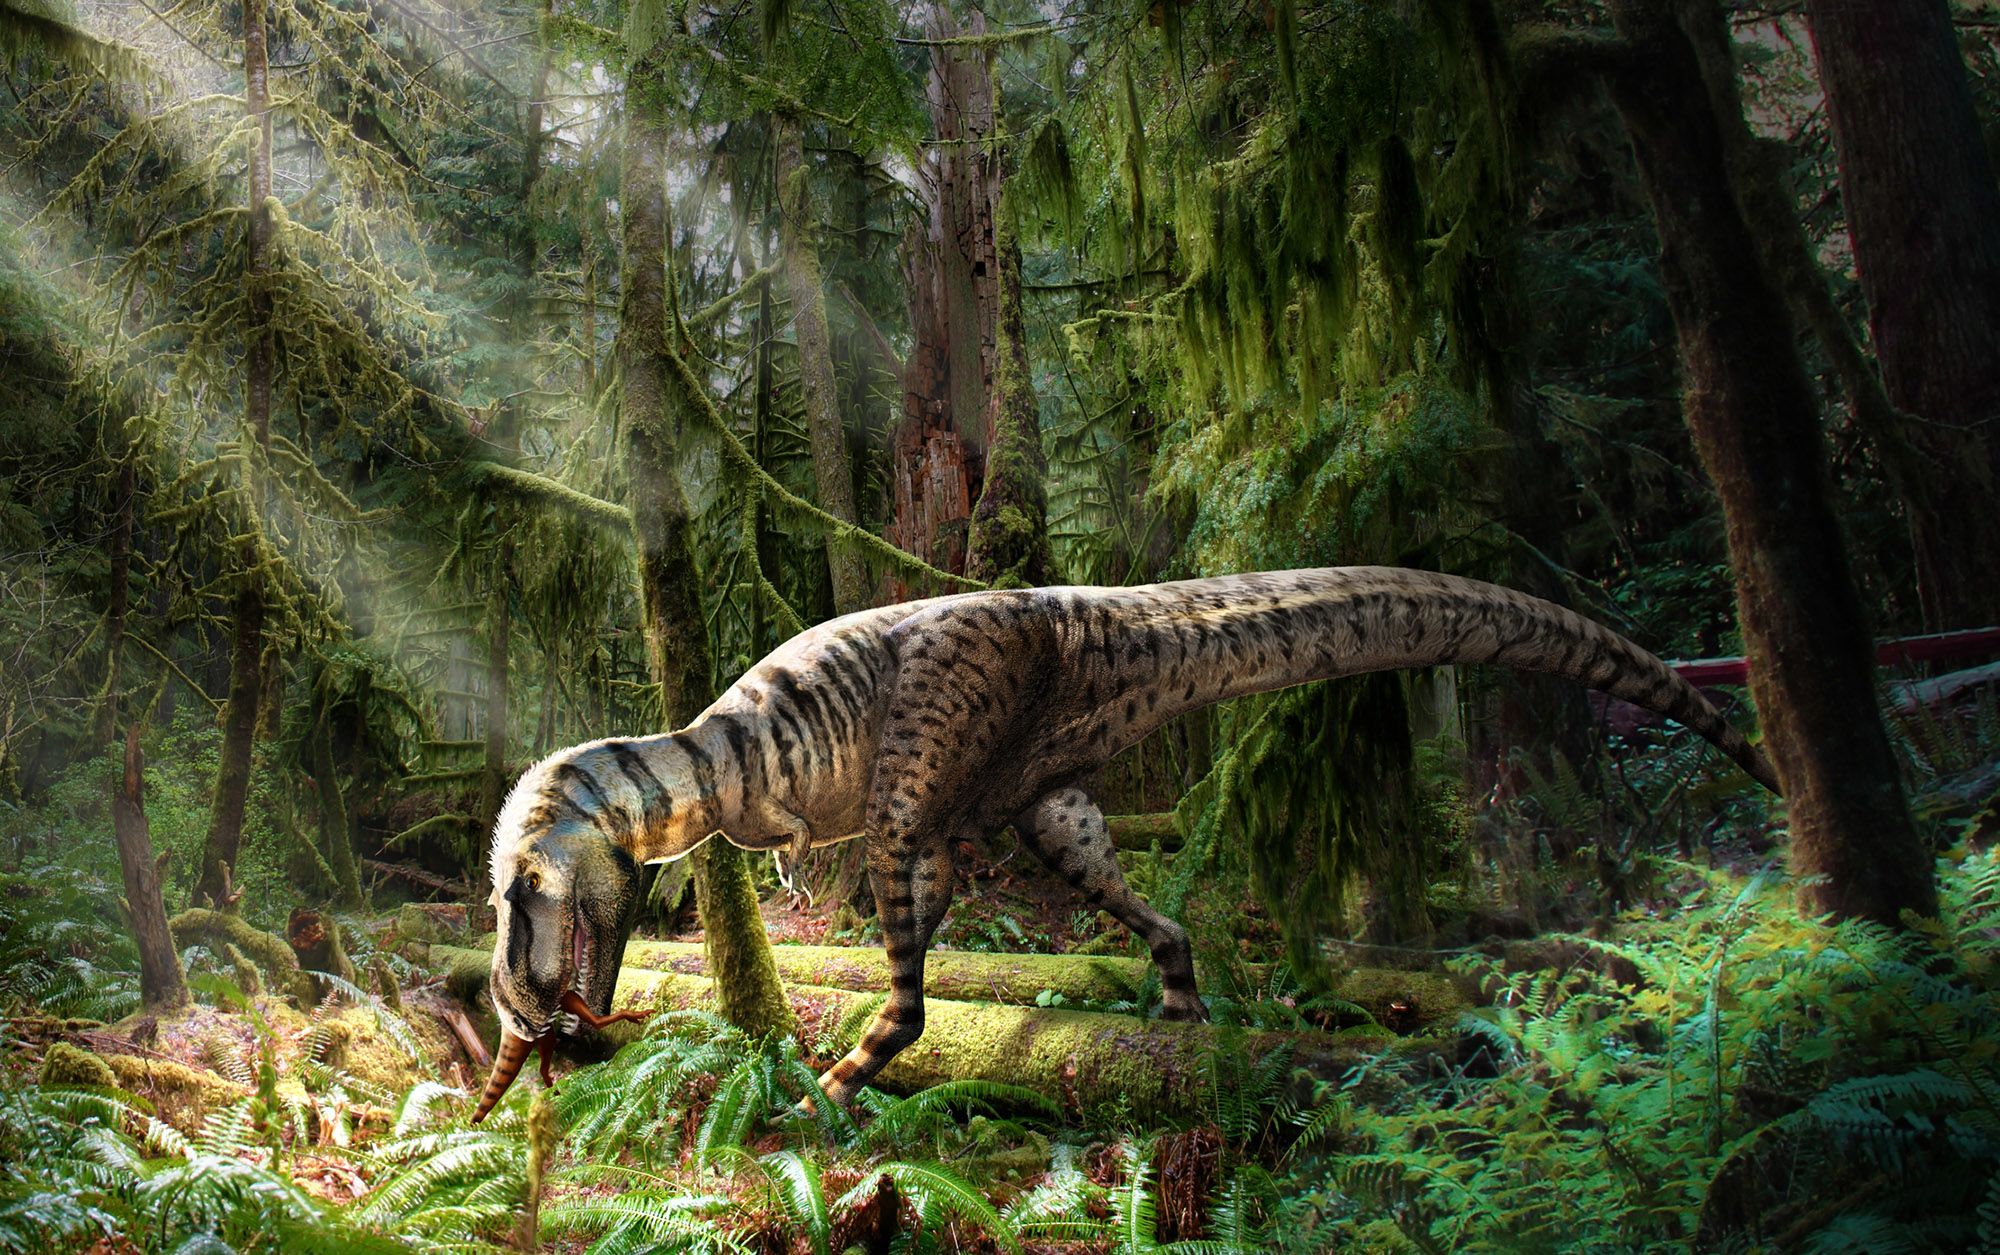 The Dino That Looked T. Rex-y Long Before T. Rex